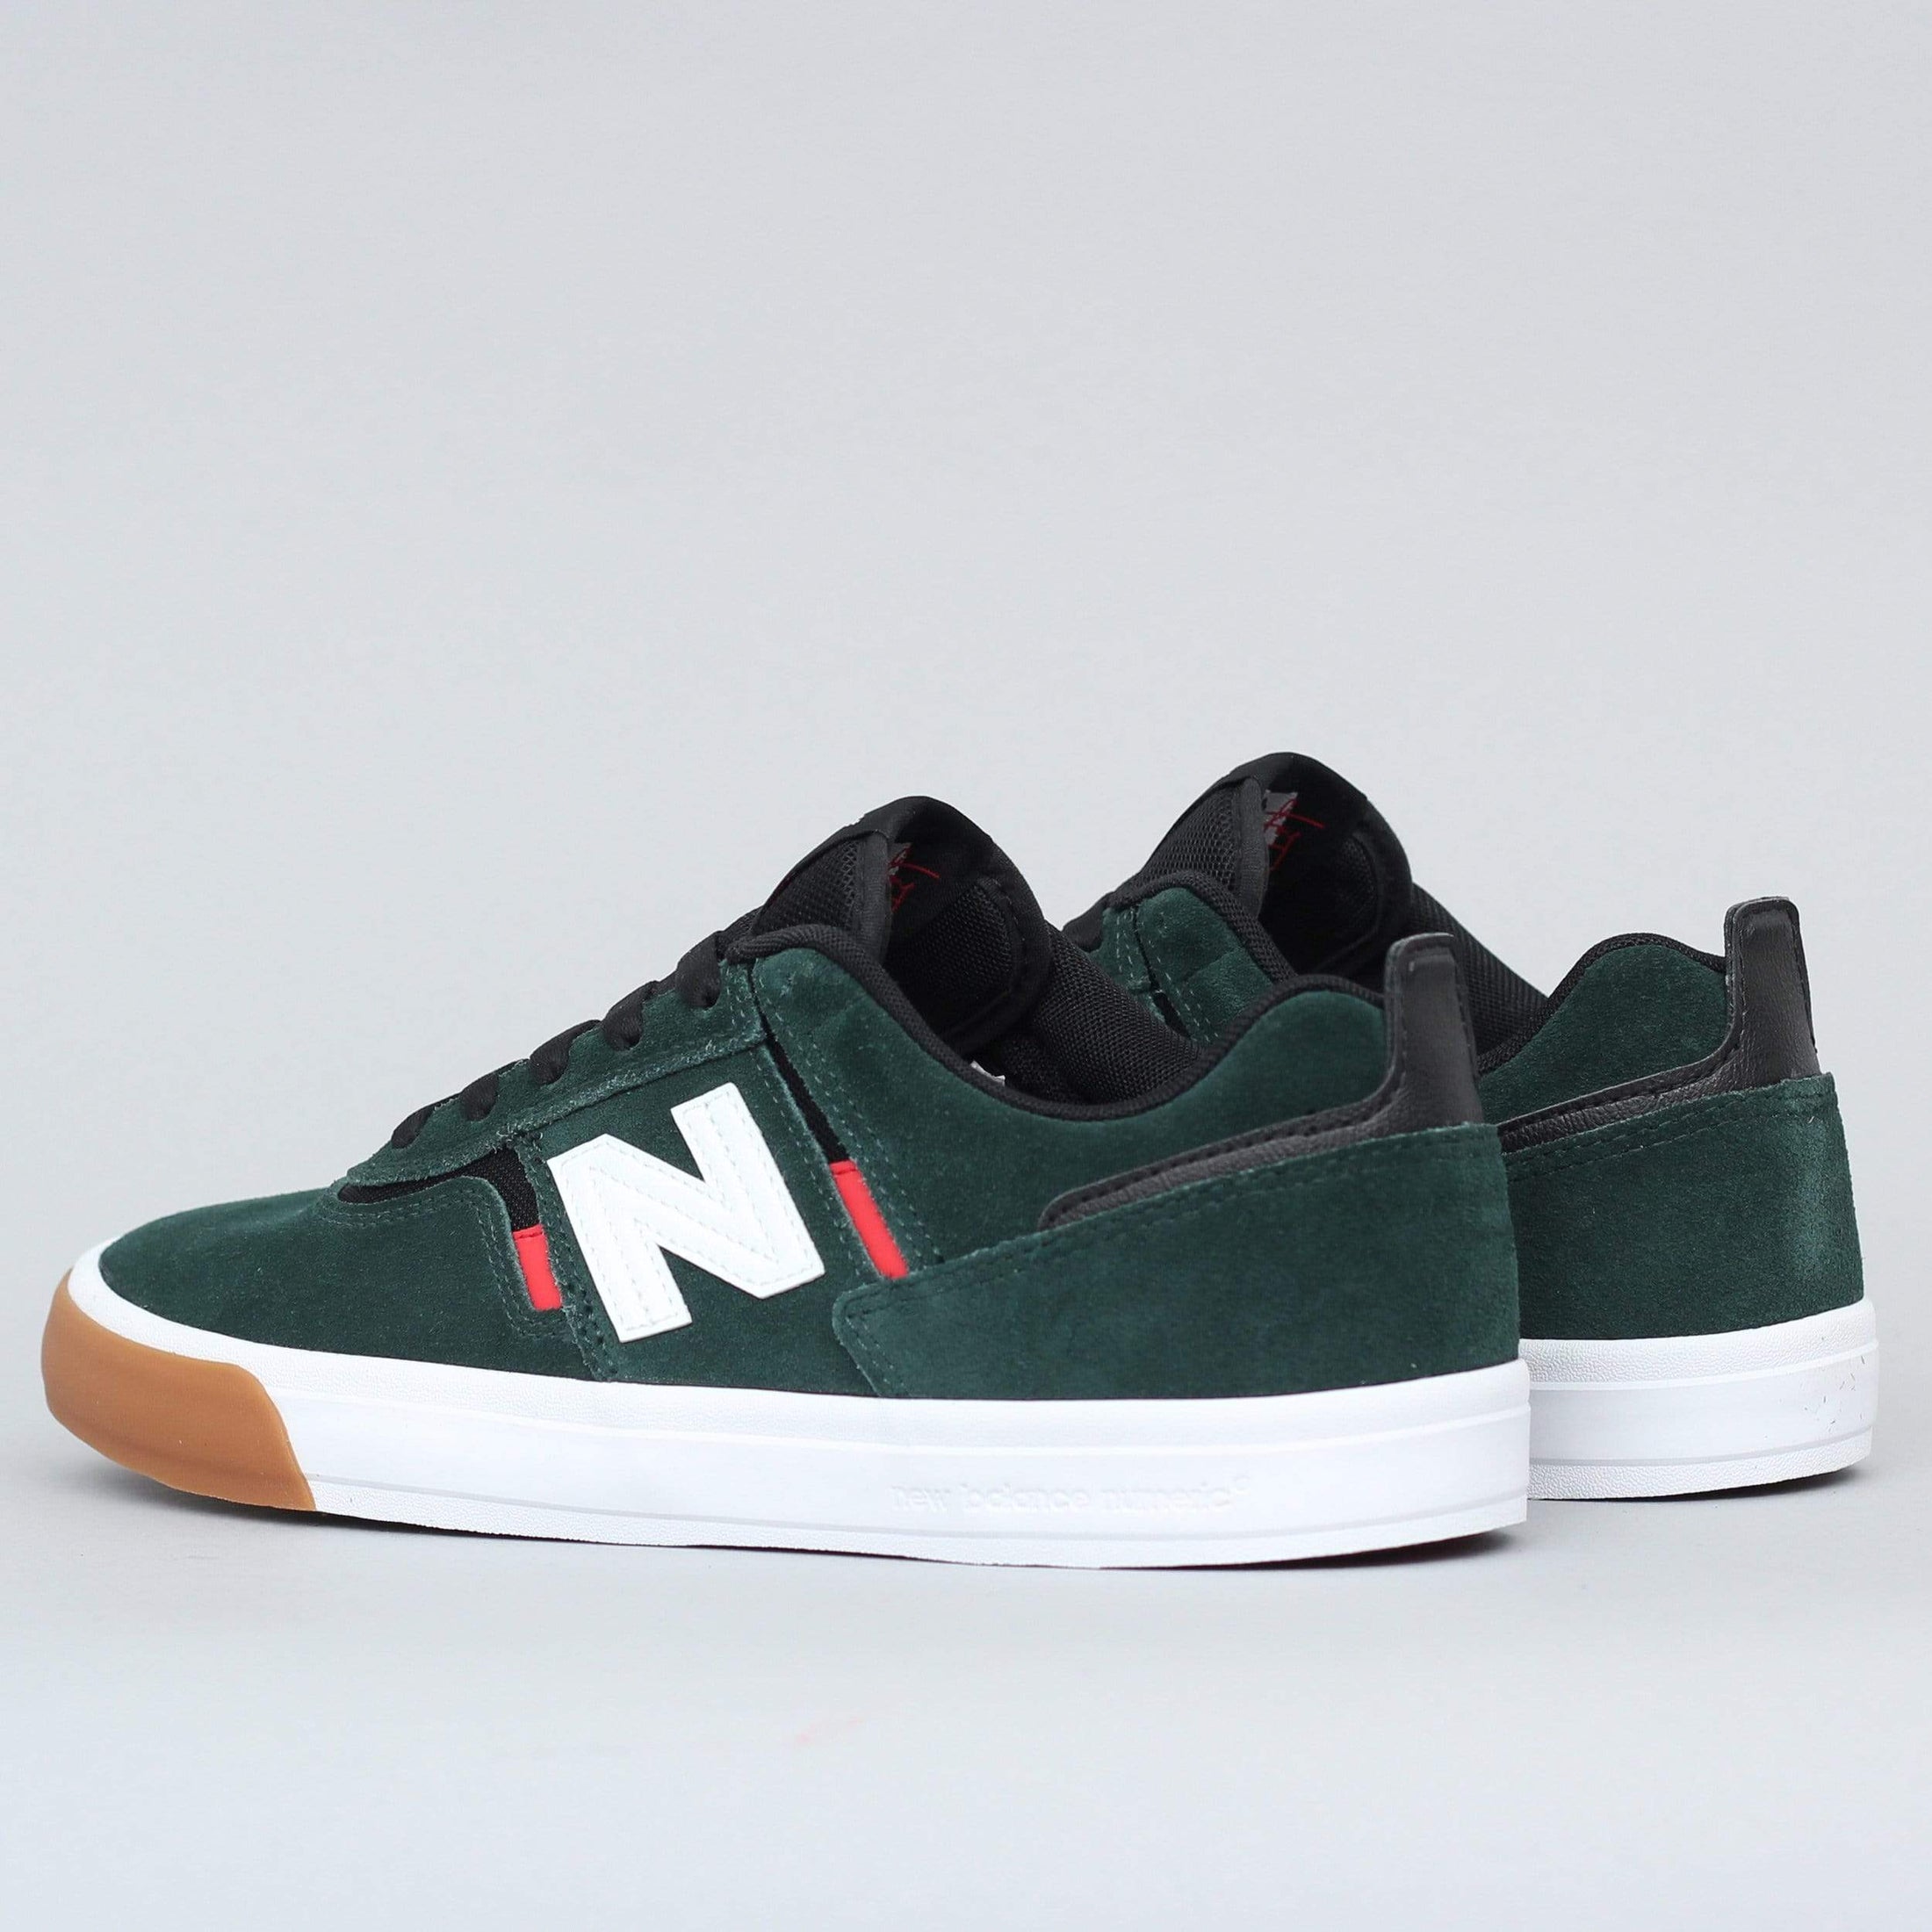 New Balance Numeric 306 Shoes Dark Green / Red